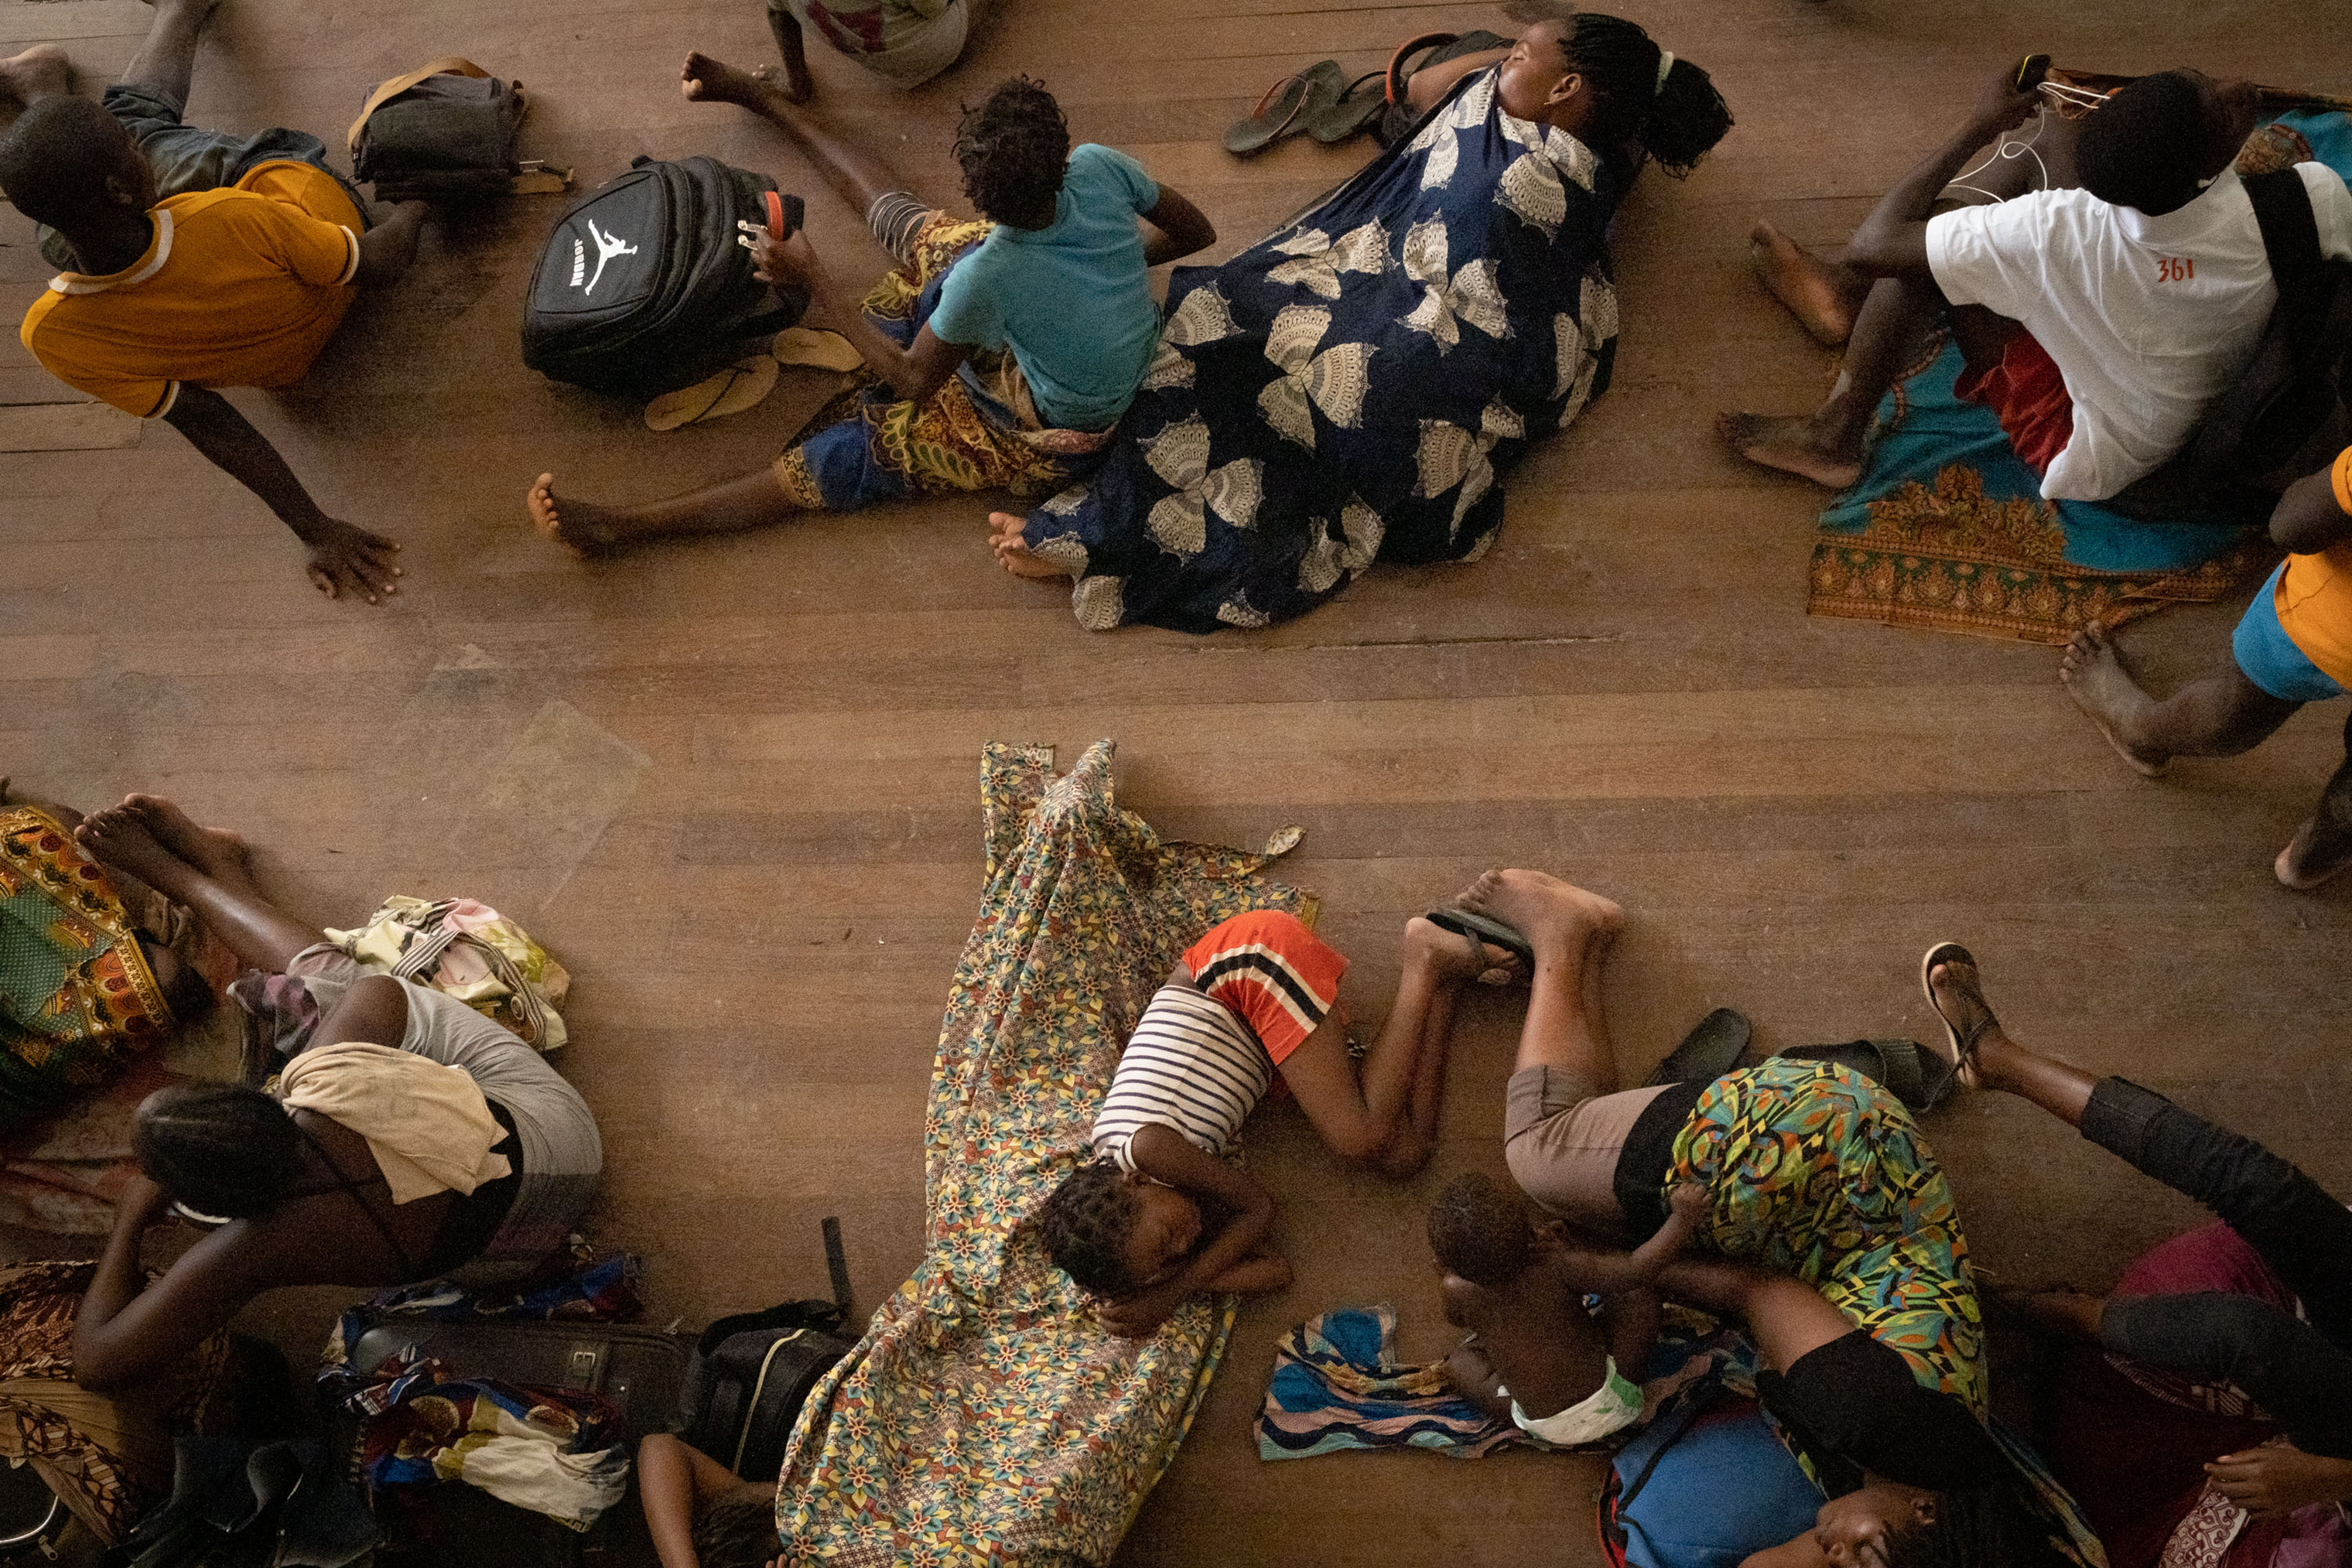 People from Buzi take shelter in the Samora M. Machel secondary school in Beira, Mozambique, on March 21, 2019, following the devastation caused by Cyclone Idai. (Yasuyoshi Chiba—AFP/Getty Images)